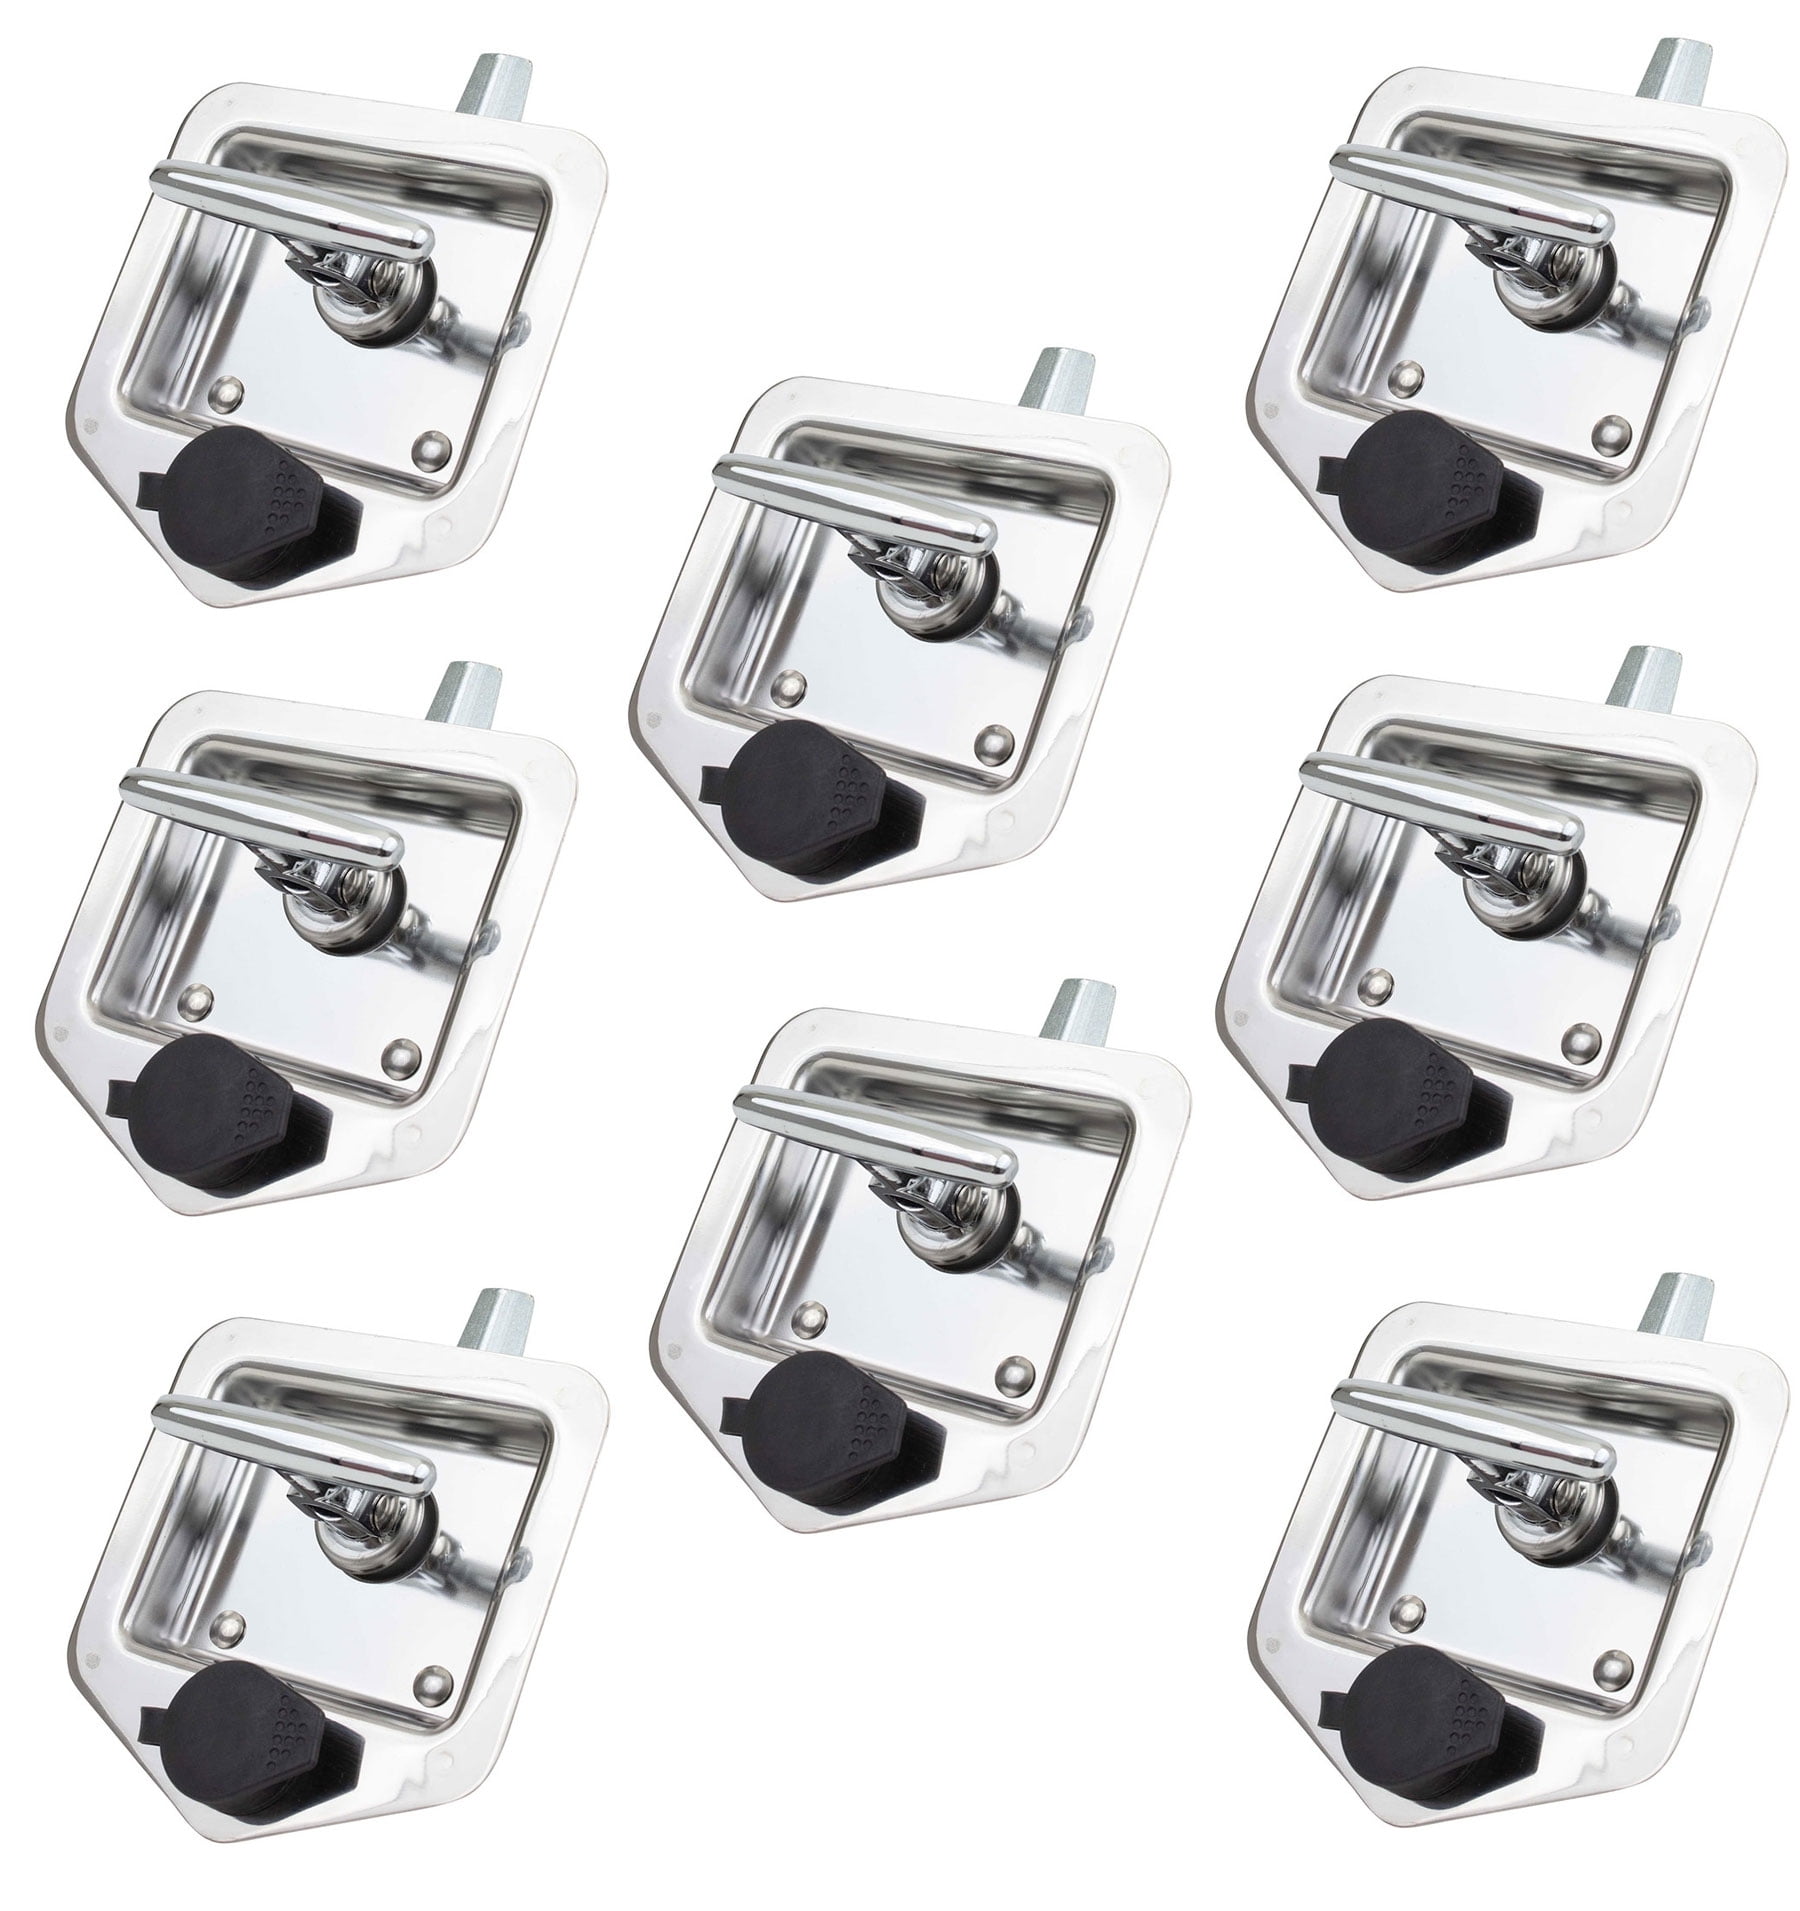  CLISPEED 3pcs Hasp Lock Freezer Door Latches Fridge Latch  T-Handle Catch Boat Latches Cabinet Latch Elastic Draw Latches Freezer  Latch Boat Hatch Latches Toolbox Hasp Rubber Electric Box : Tools 